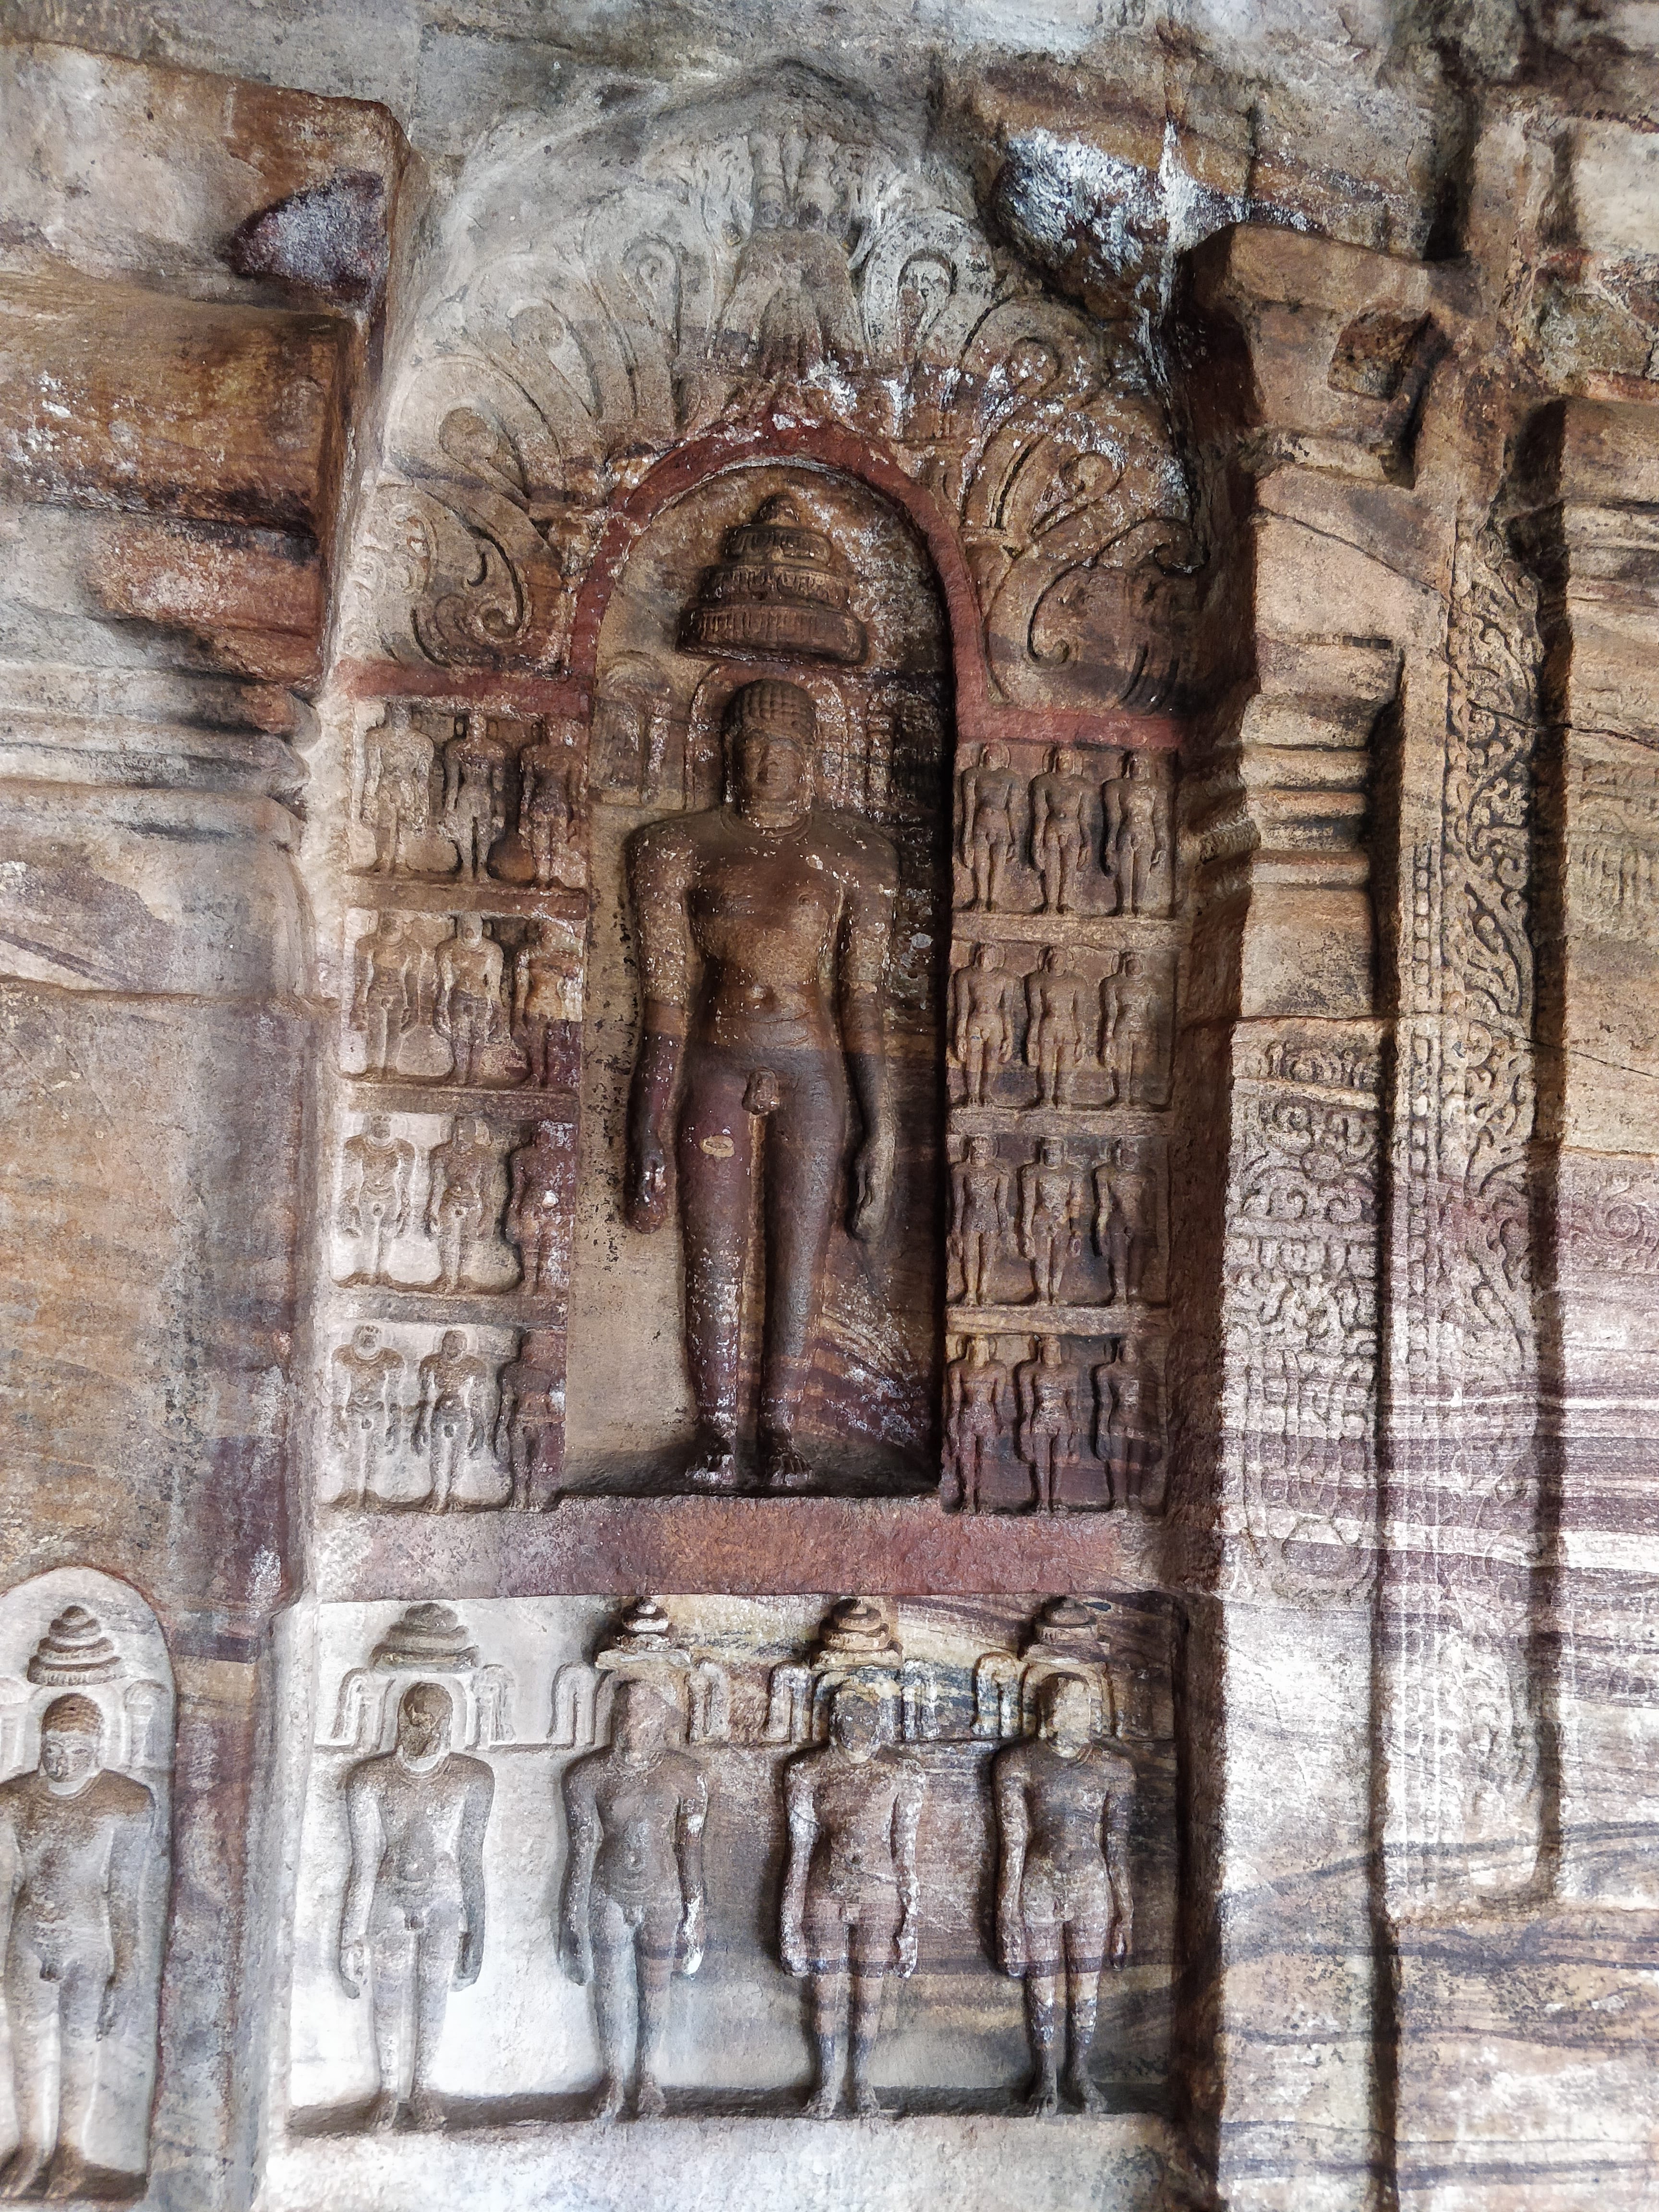 carvings on the wall